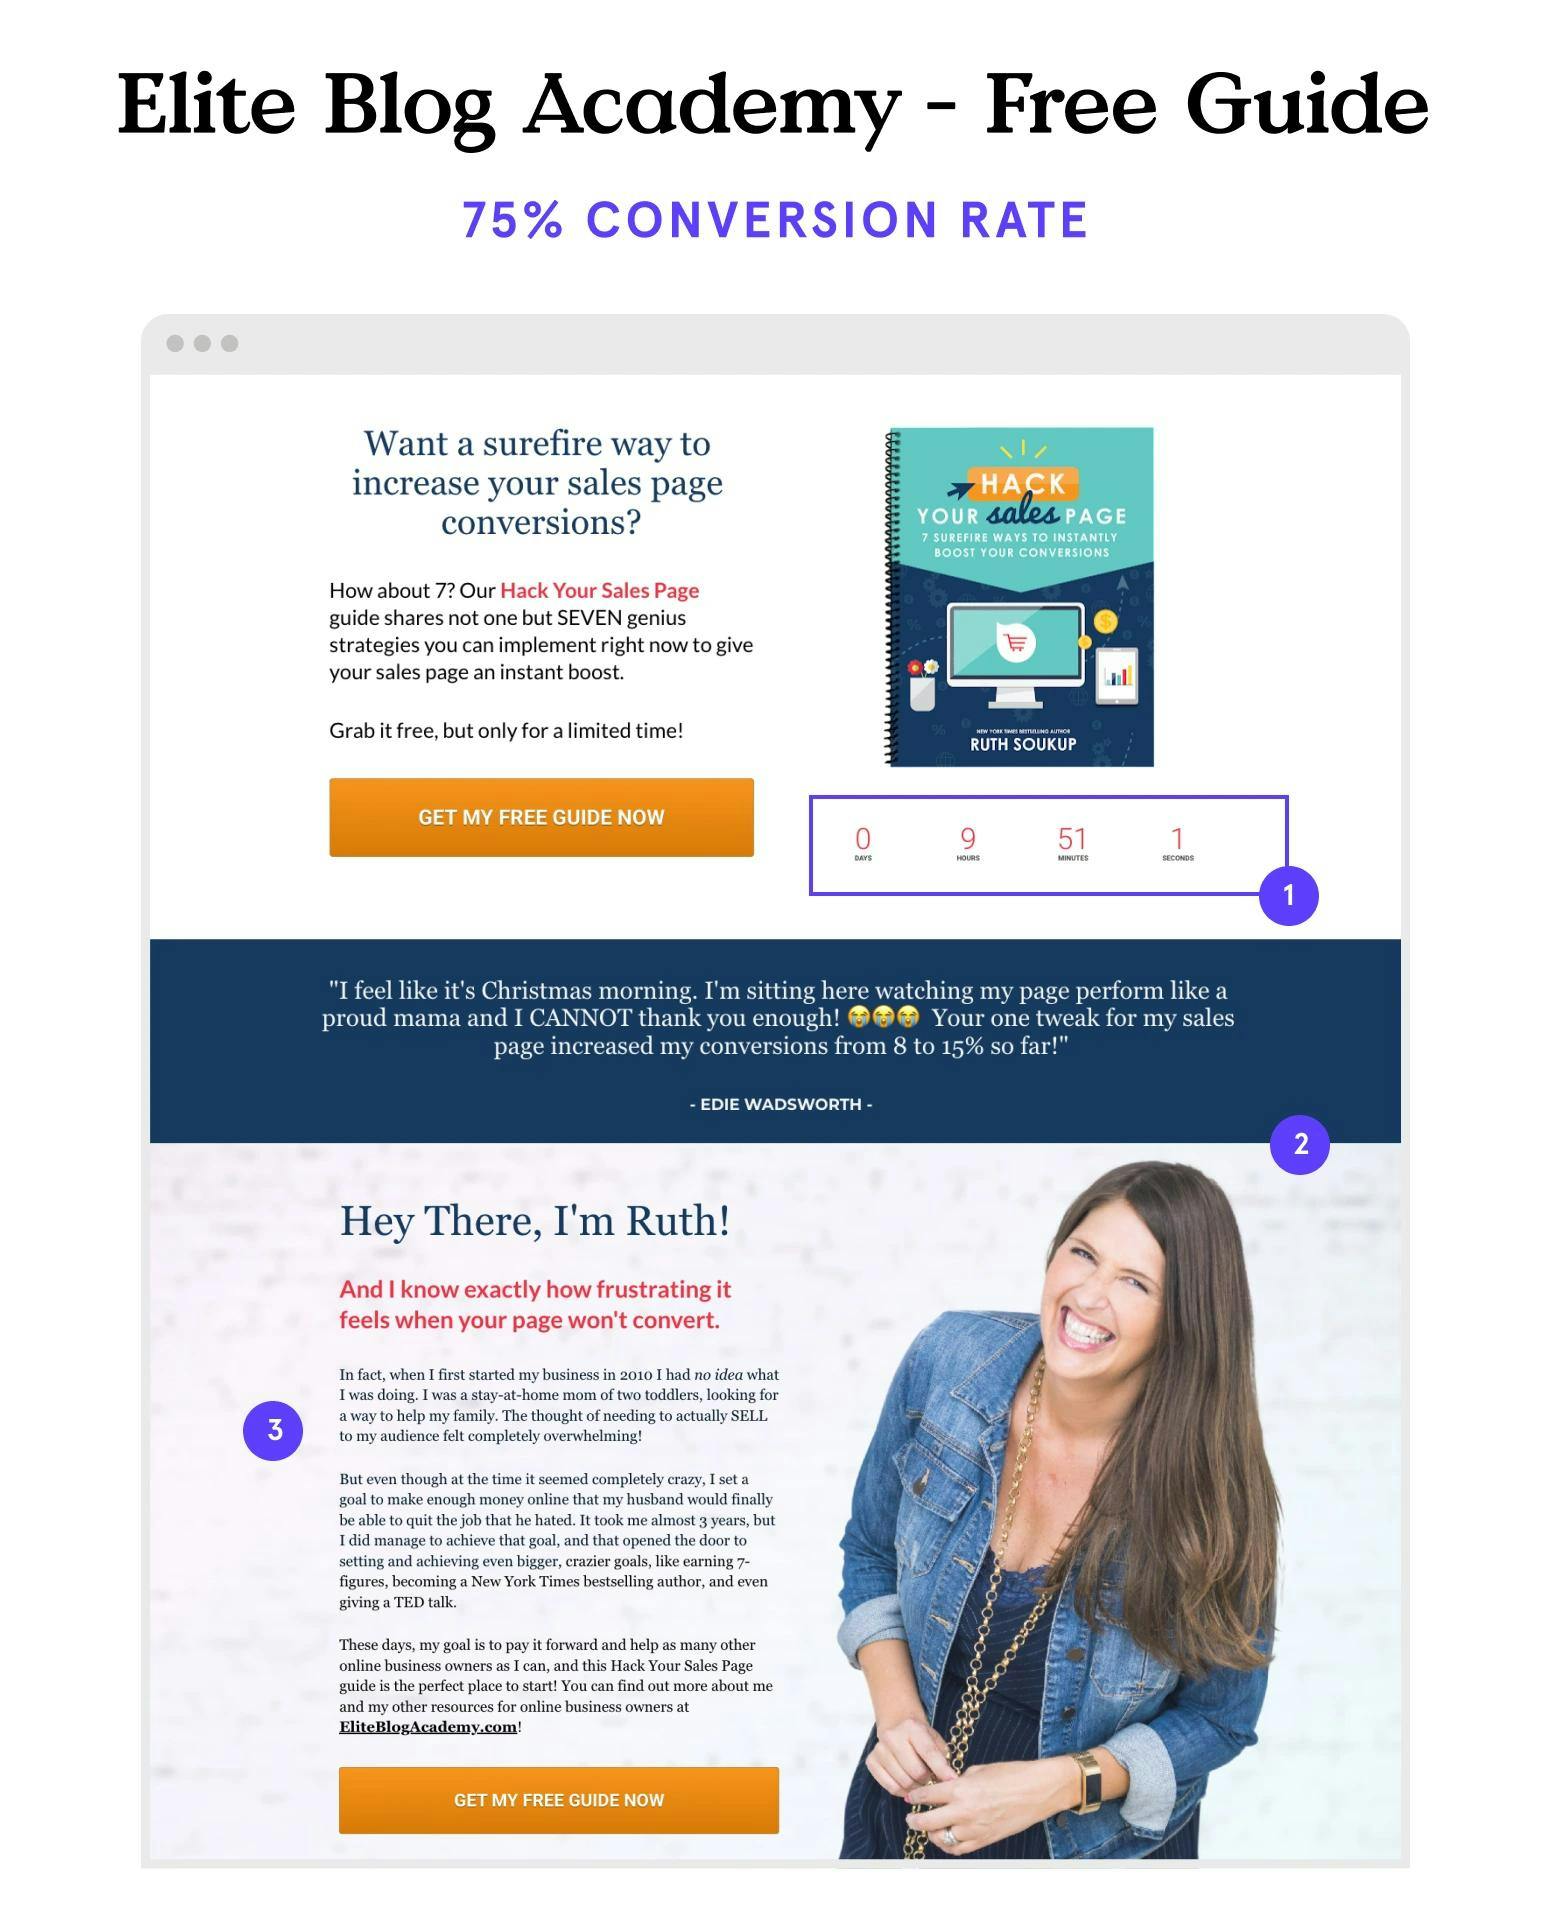 Free guide lead generation landing page example